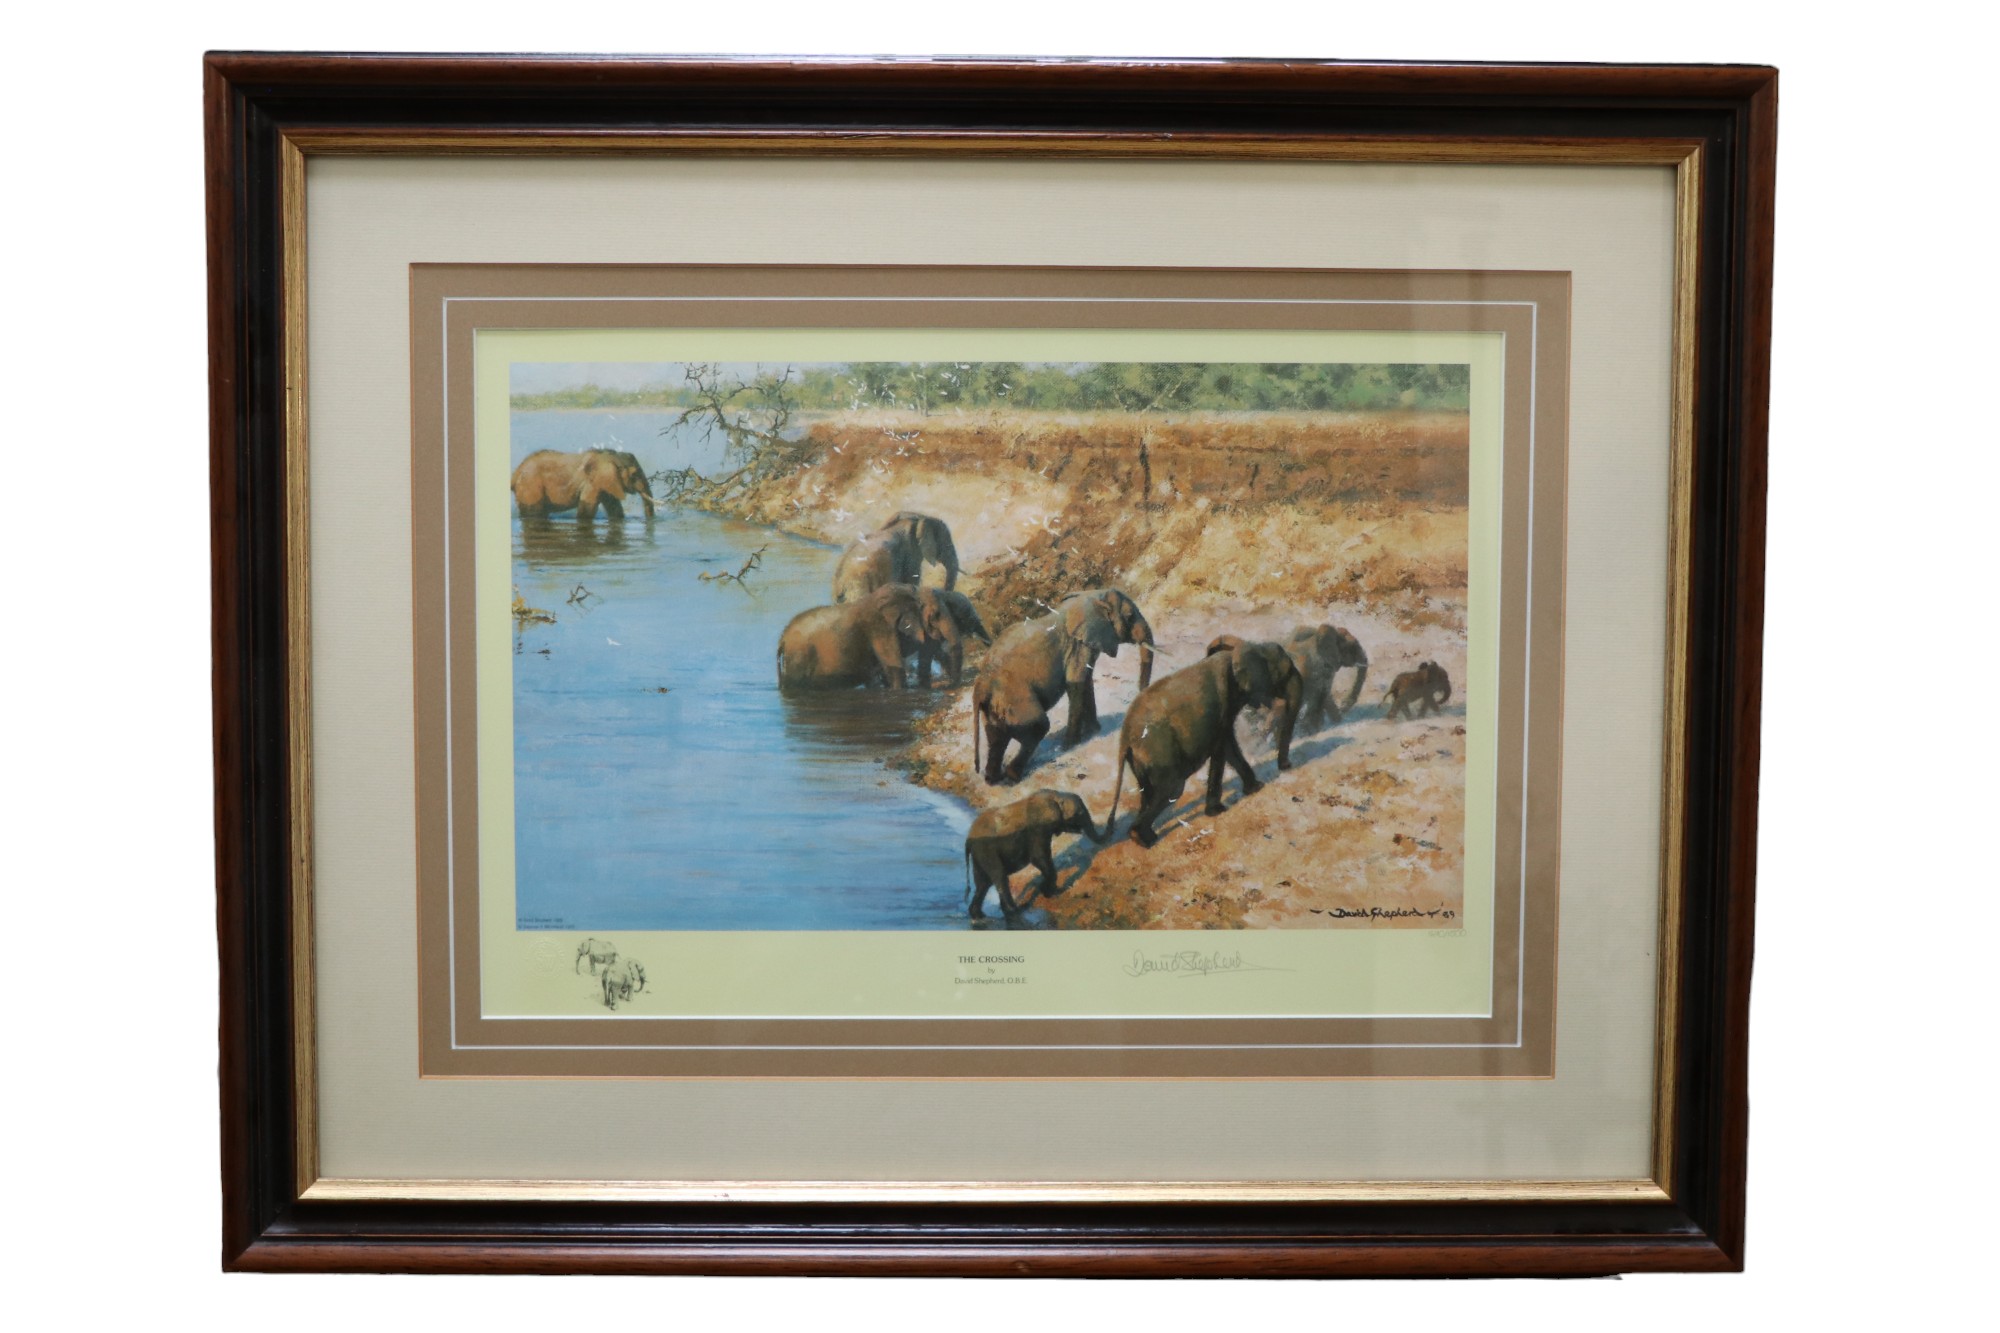 After David Shepherd (1931-2017) "The Crossing", a study of elephants emerging from a river onto its